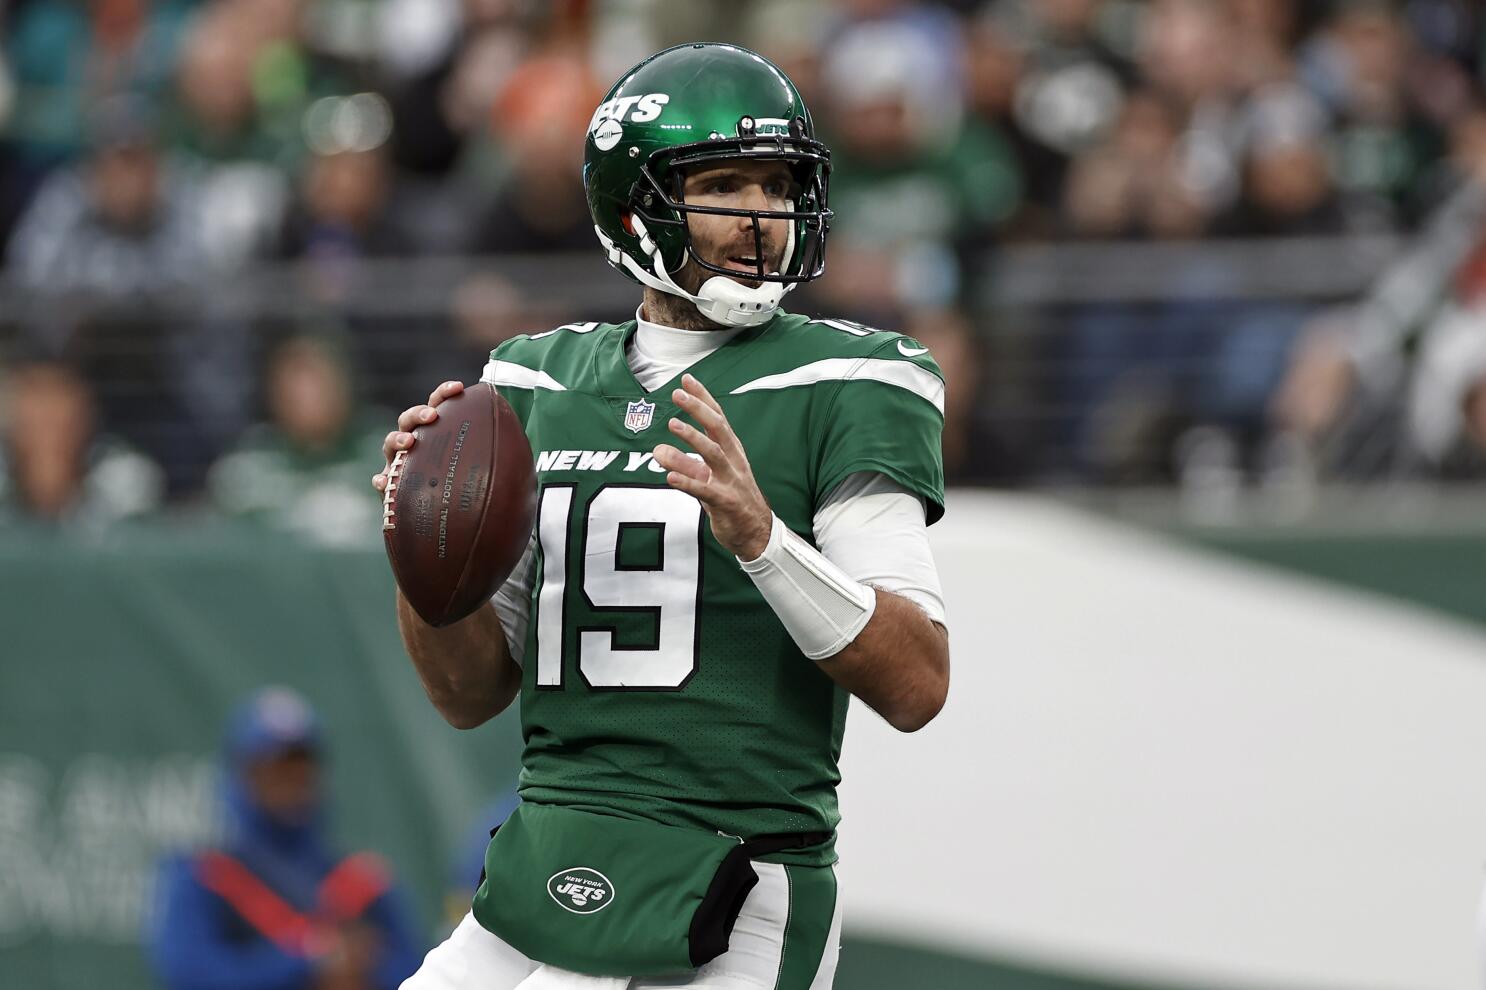 Jets bringing back QBs Flacco, White as Wilson's backups - The San